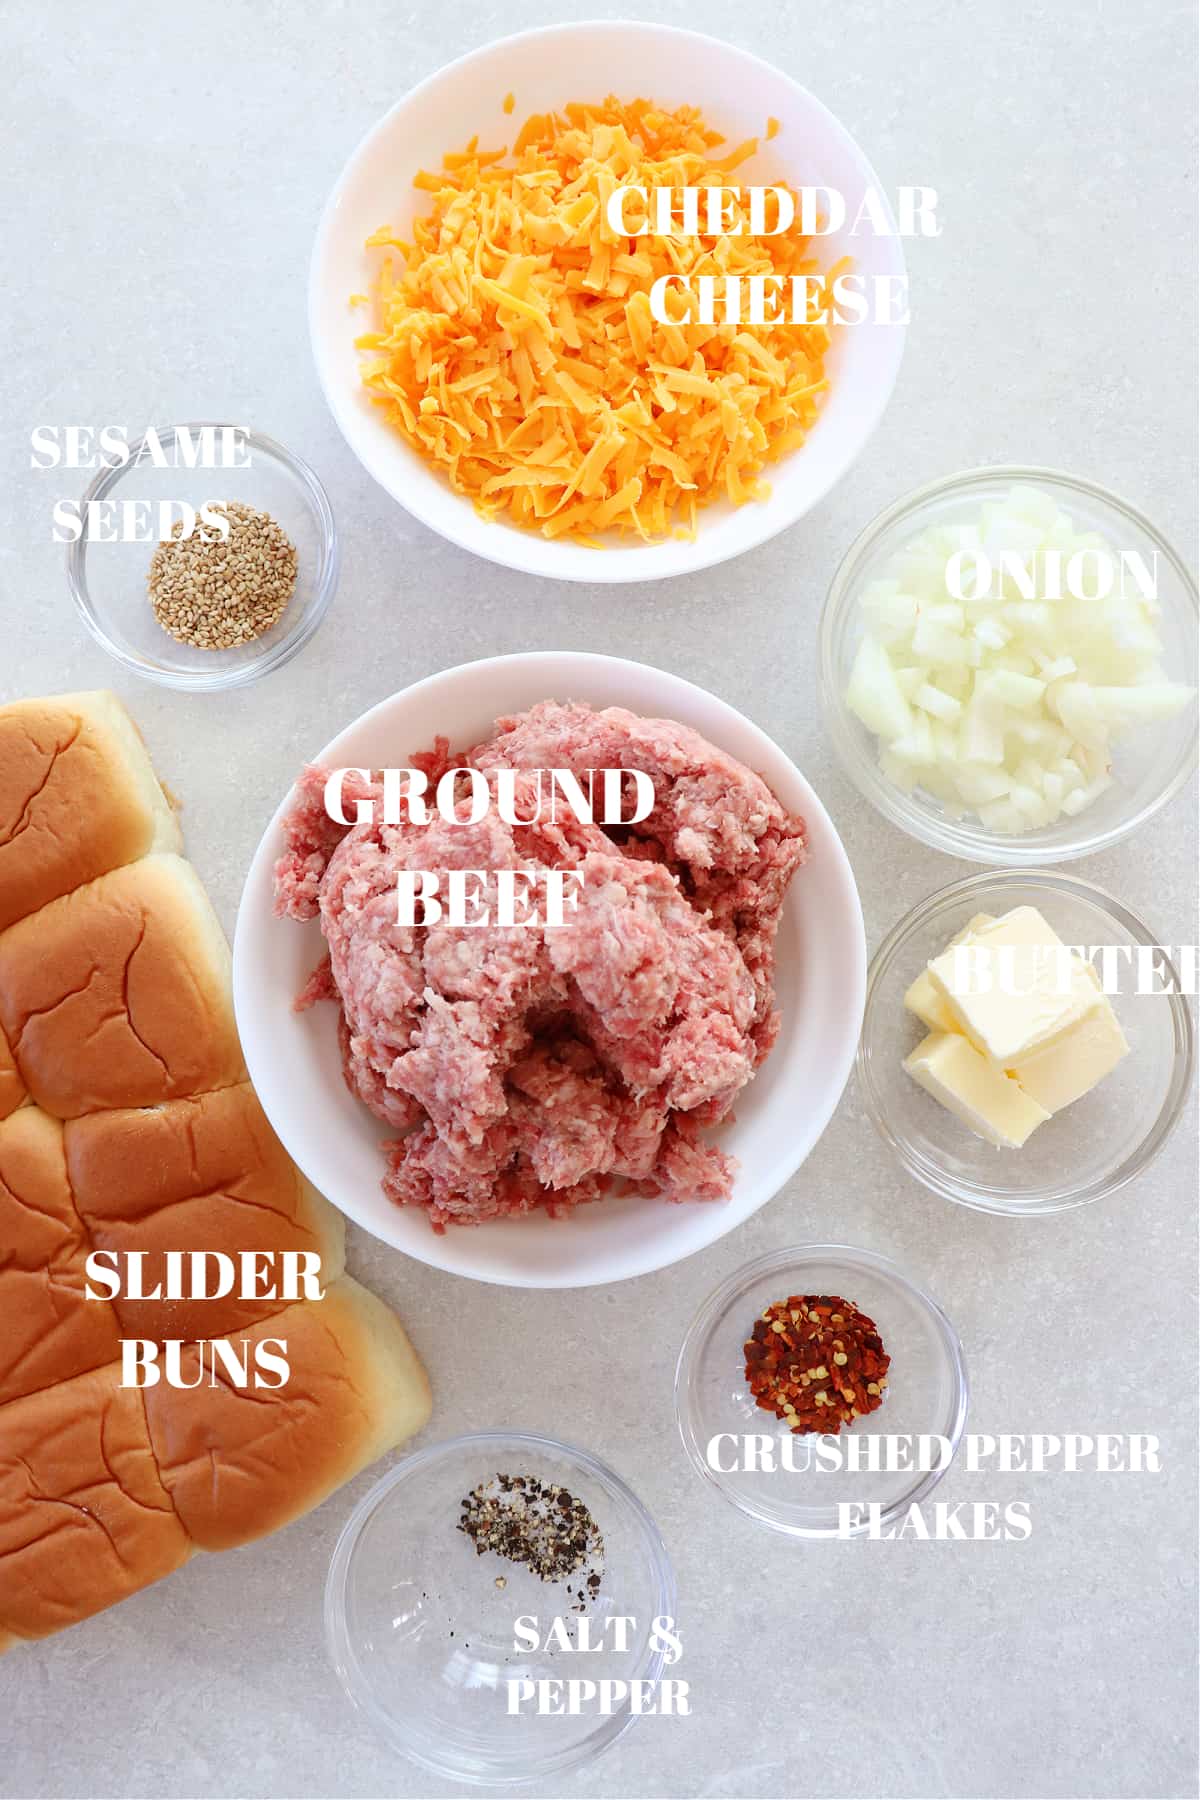 Ingredients for cheeseburger sliders on a board.